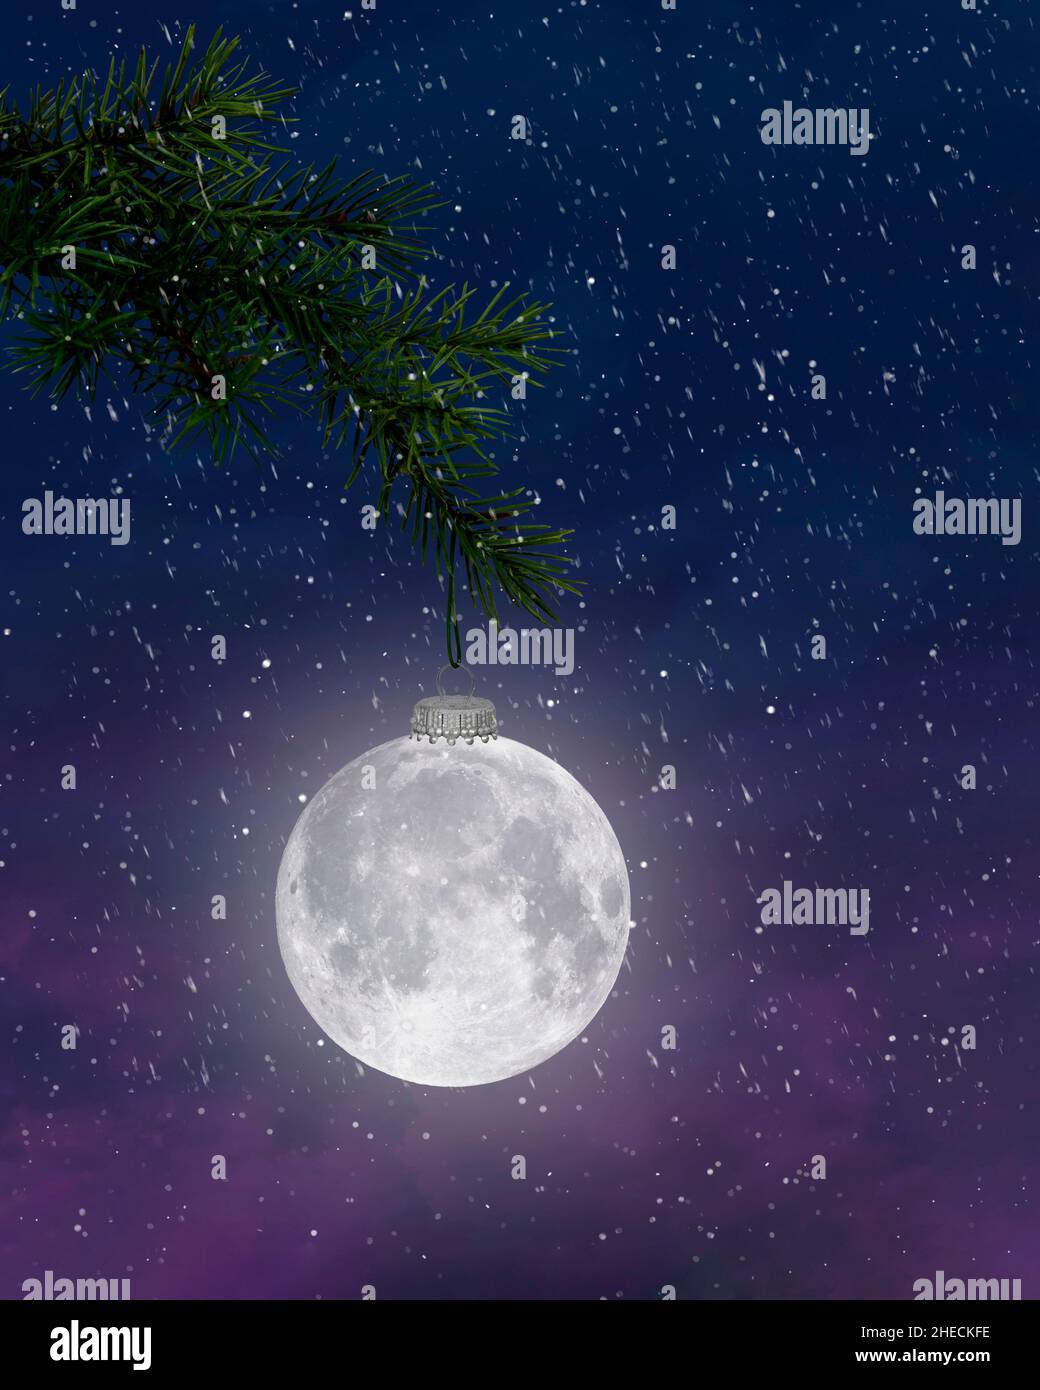 Full moon holiday ornament hanging from pine bough in snowflakes Stock Photo